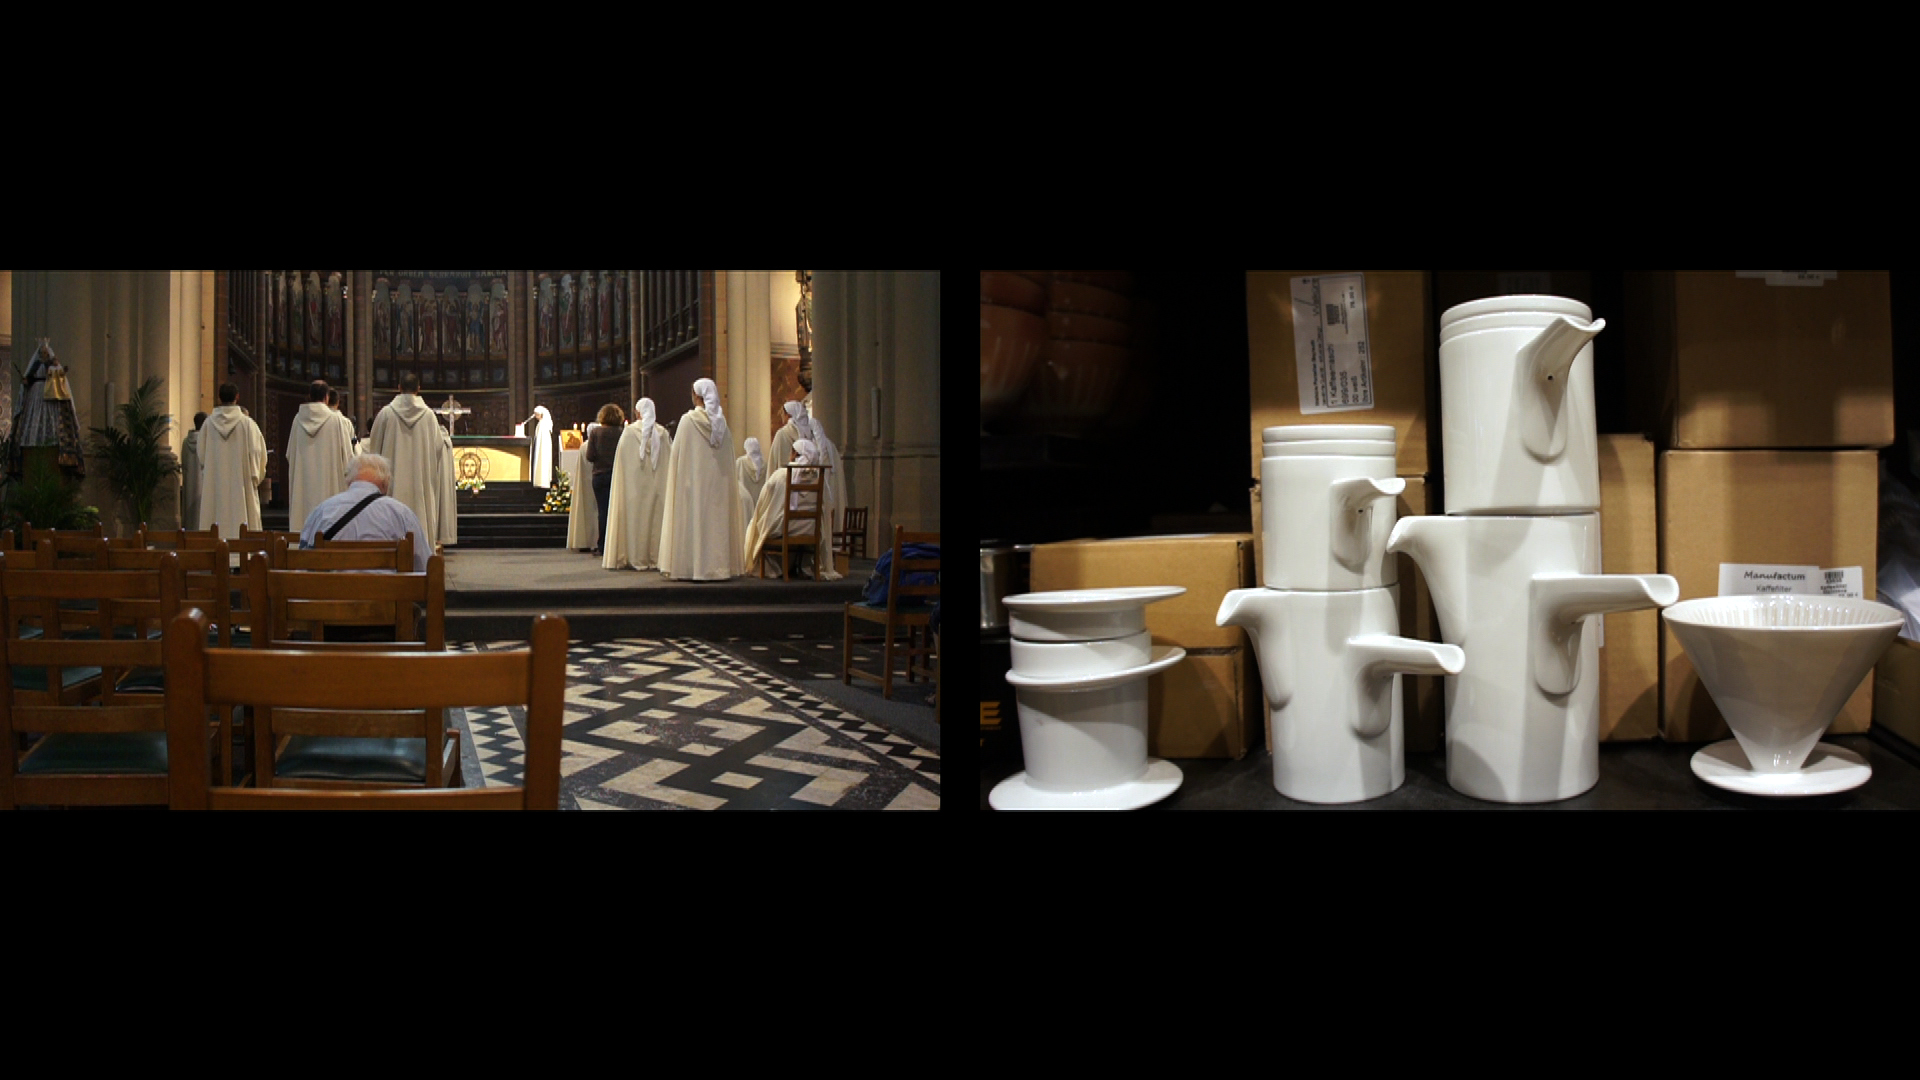 Two video stills sit horizontally side by side. On the left is a view taken in a traditional Catholic church or cathedral, taken from a church pew. The camera captures a series of white-gowned nun and monk figures facing the altar, with their back to the camera. In the front row, an older balding man in a blue shirt bows his head. On the right is a close up shot of a department store shelf, depicting expensive designer white porcelain jugs with minimalist handles and a coffee filter holder. The two images seem to mirror one another.